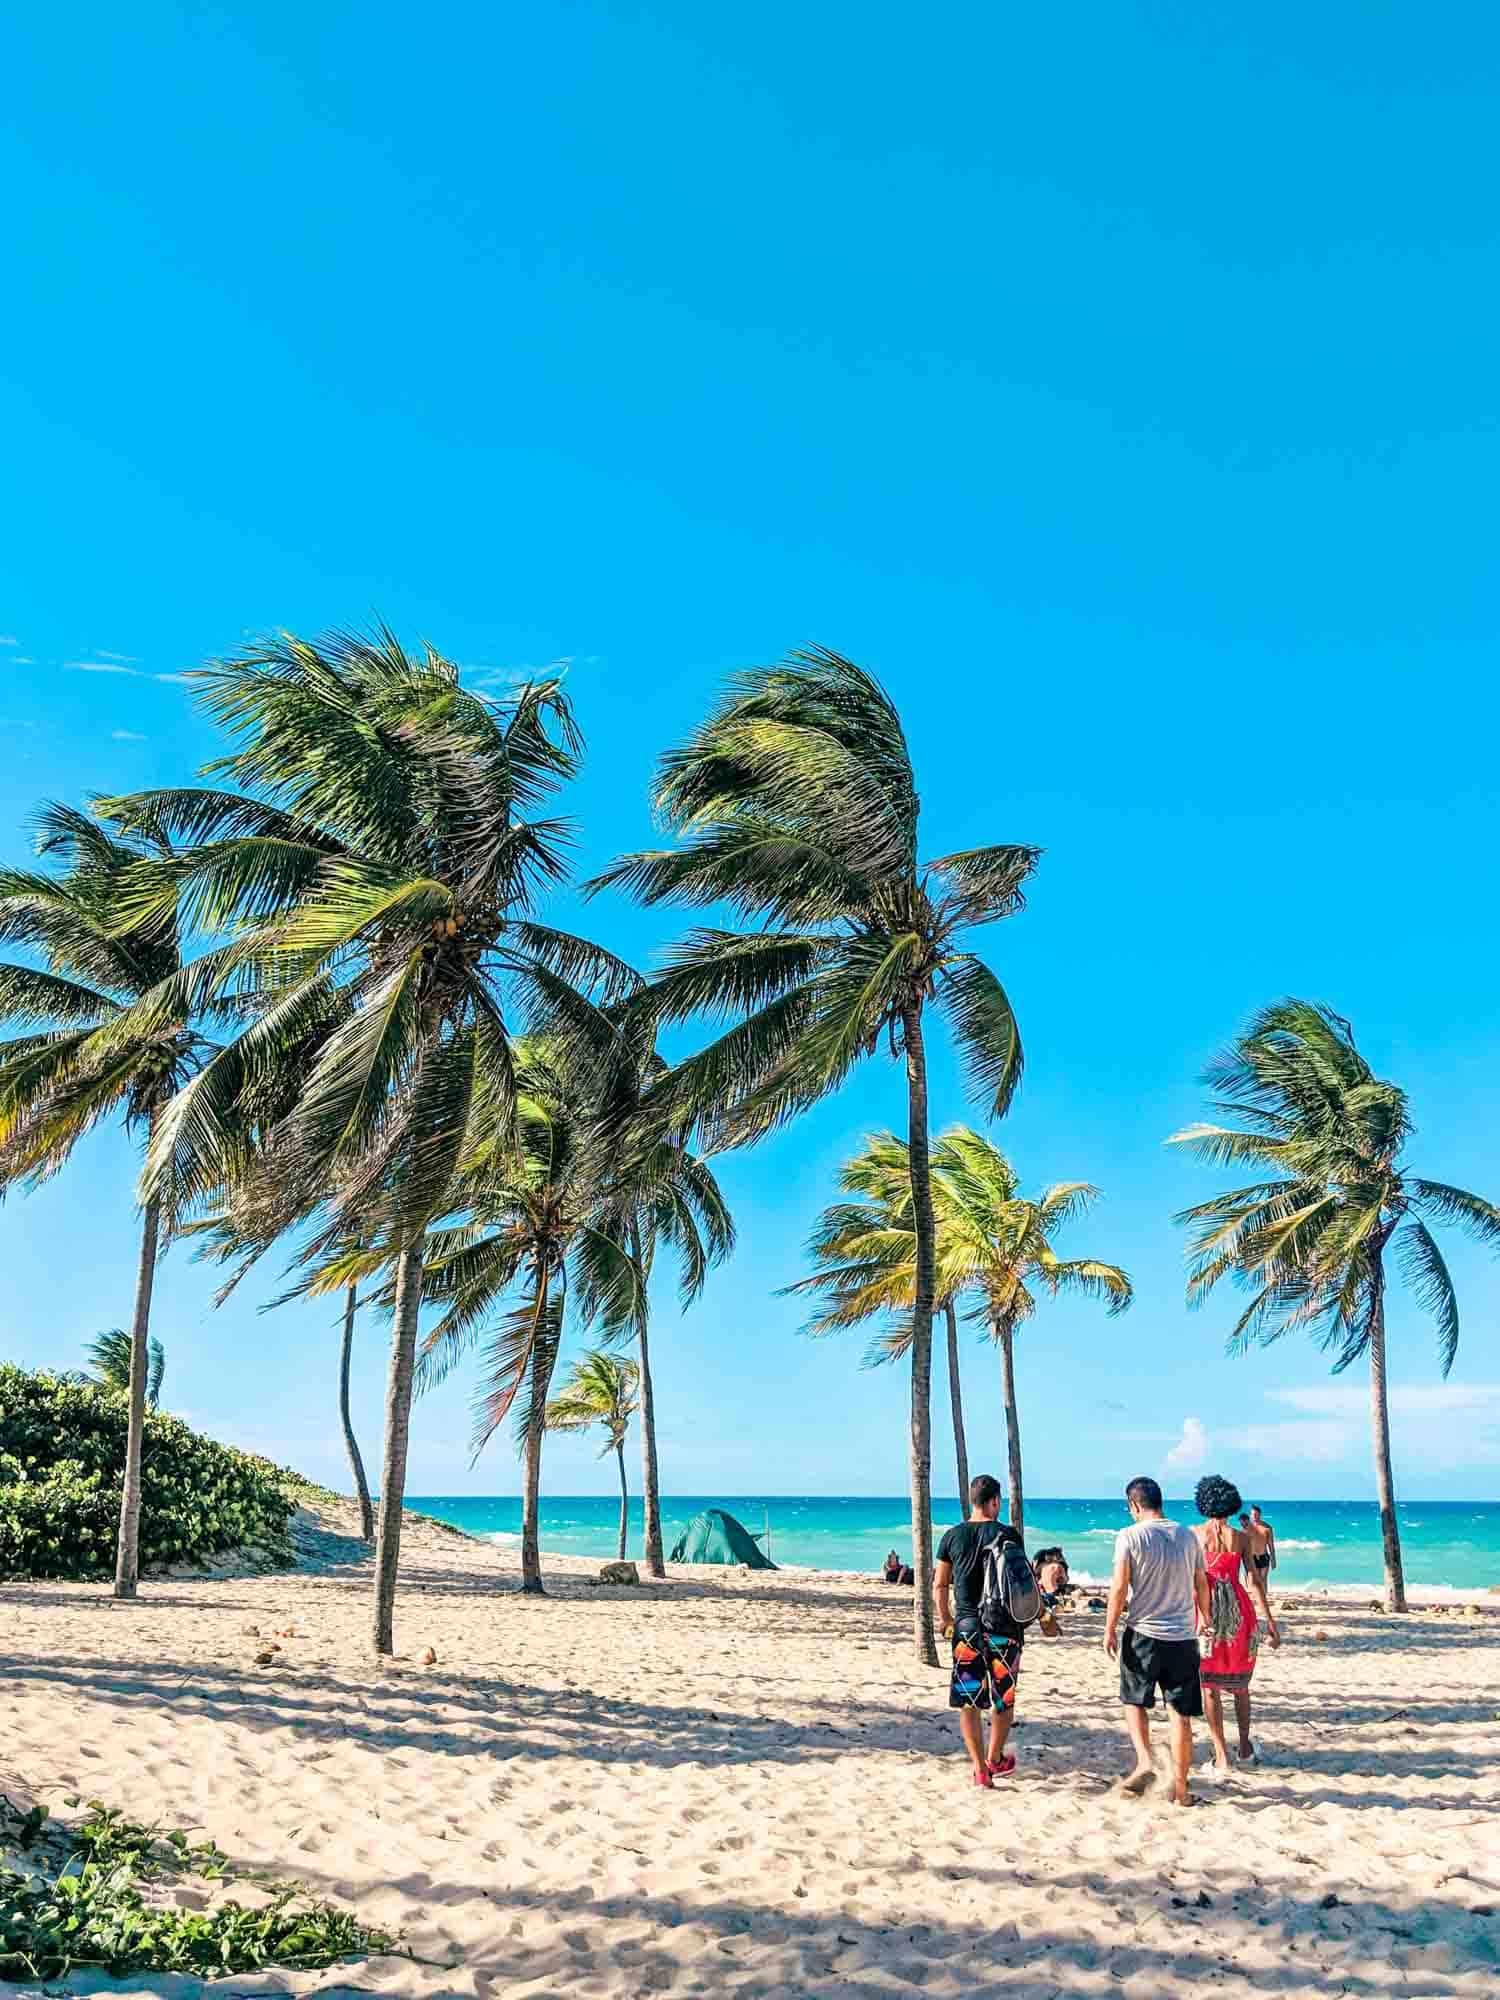 Playas del Este are Havana beaches just 30 minutes outside the city, discover which ones to visit.